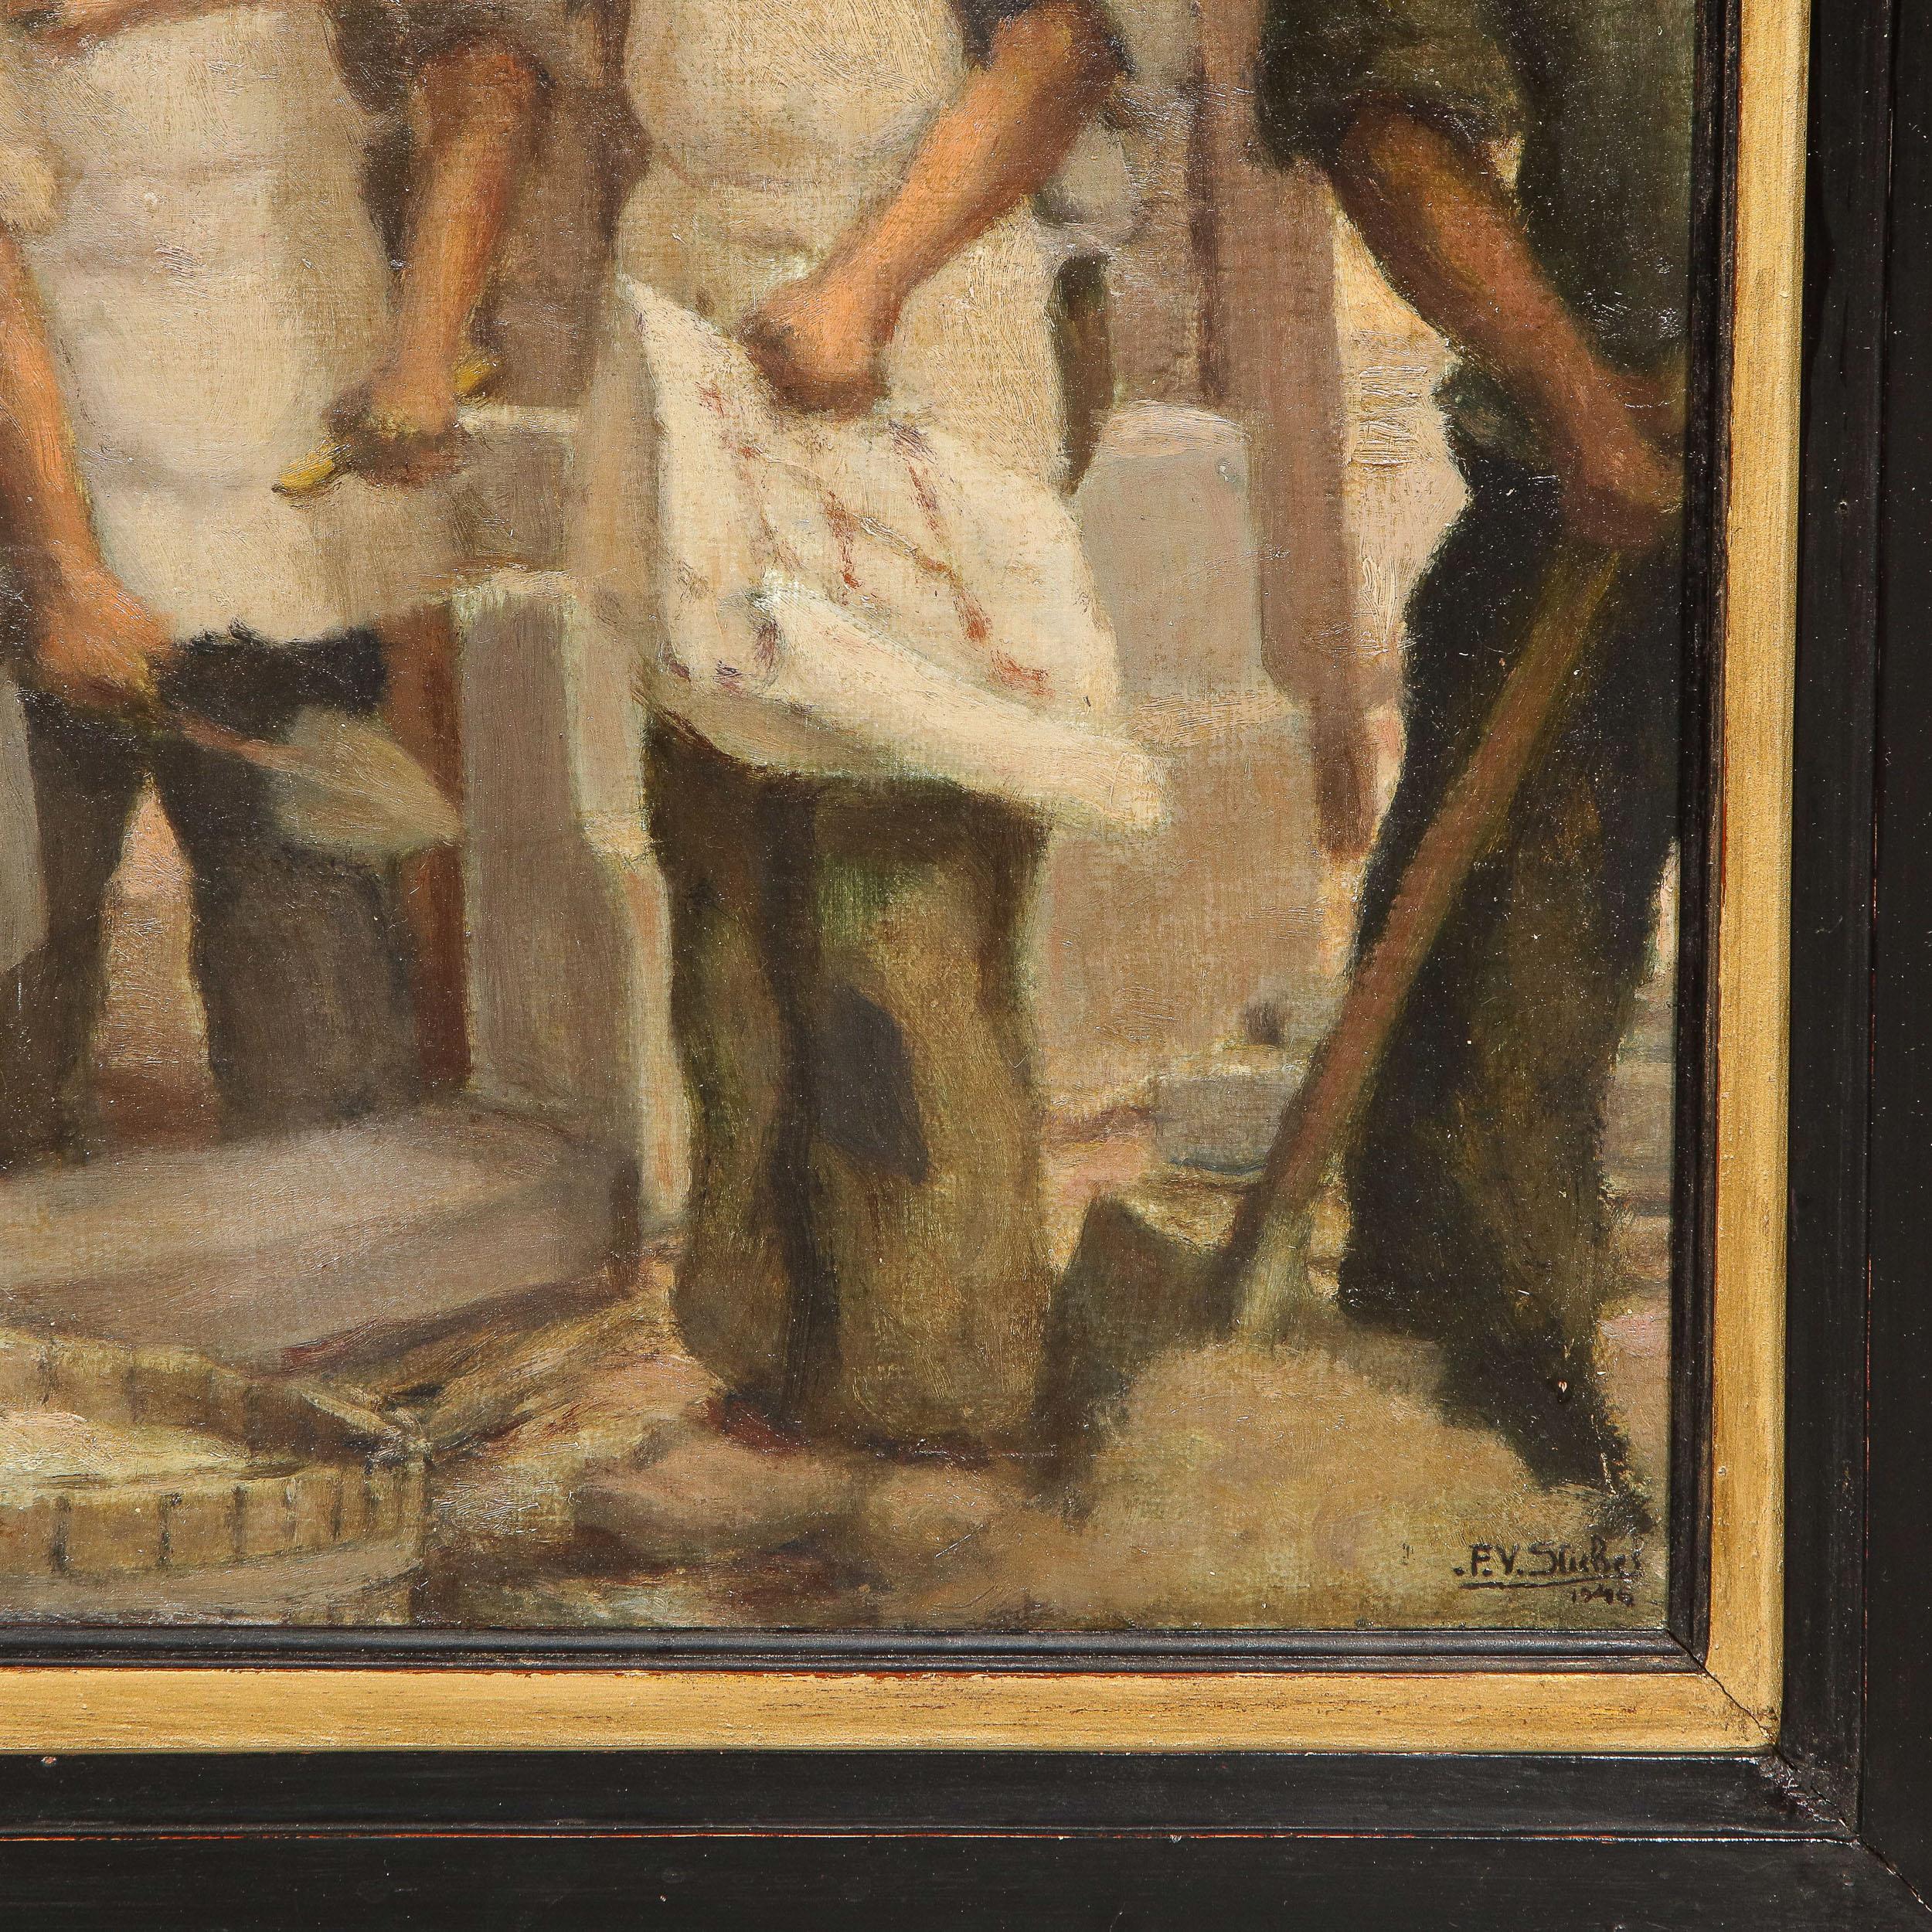 Les Masons - Realist Painting by F.V. Sliches